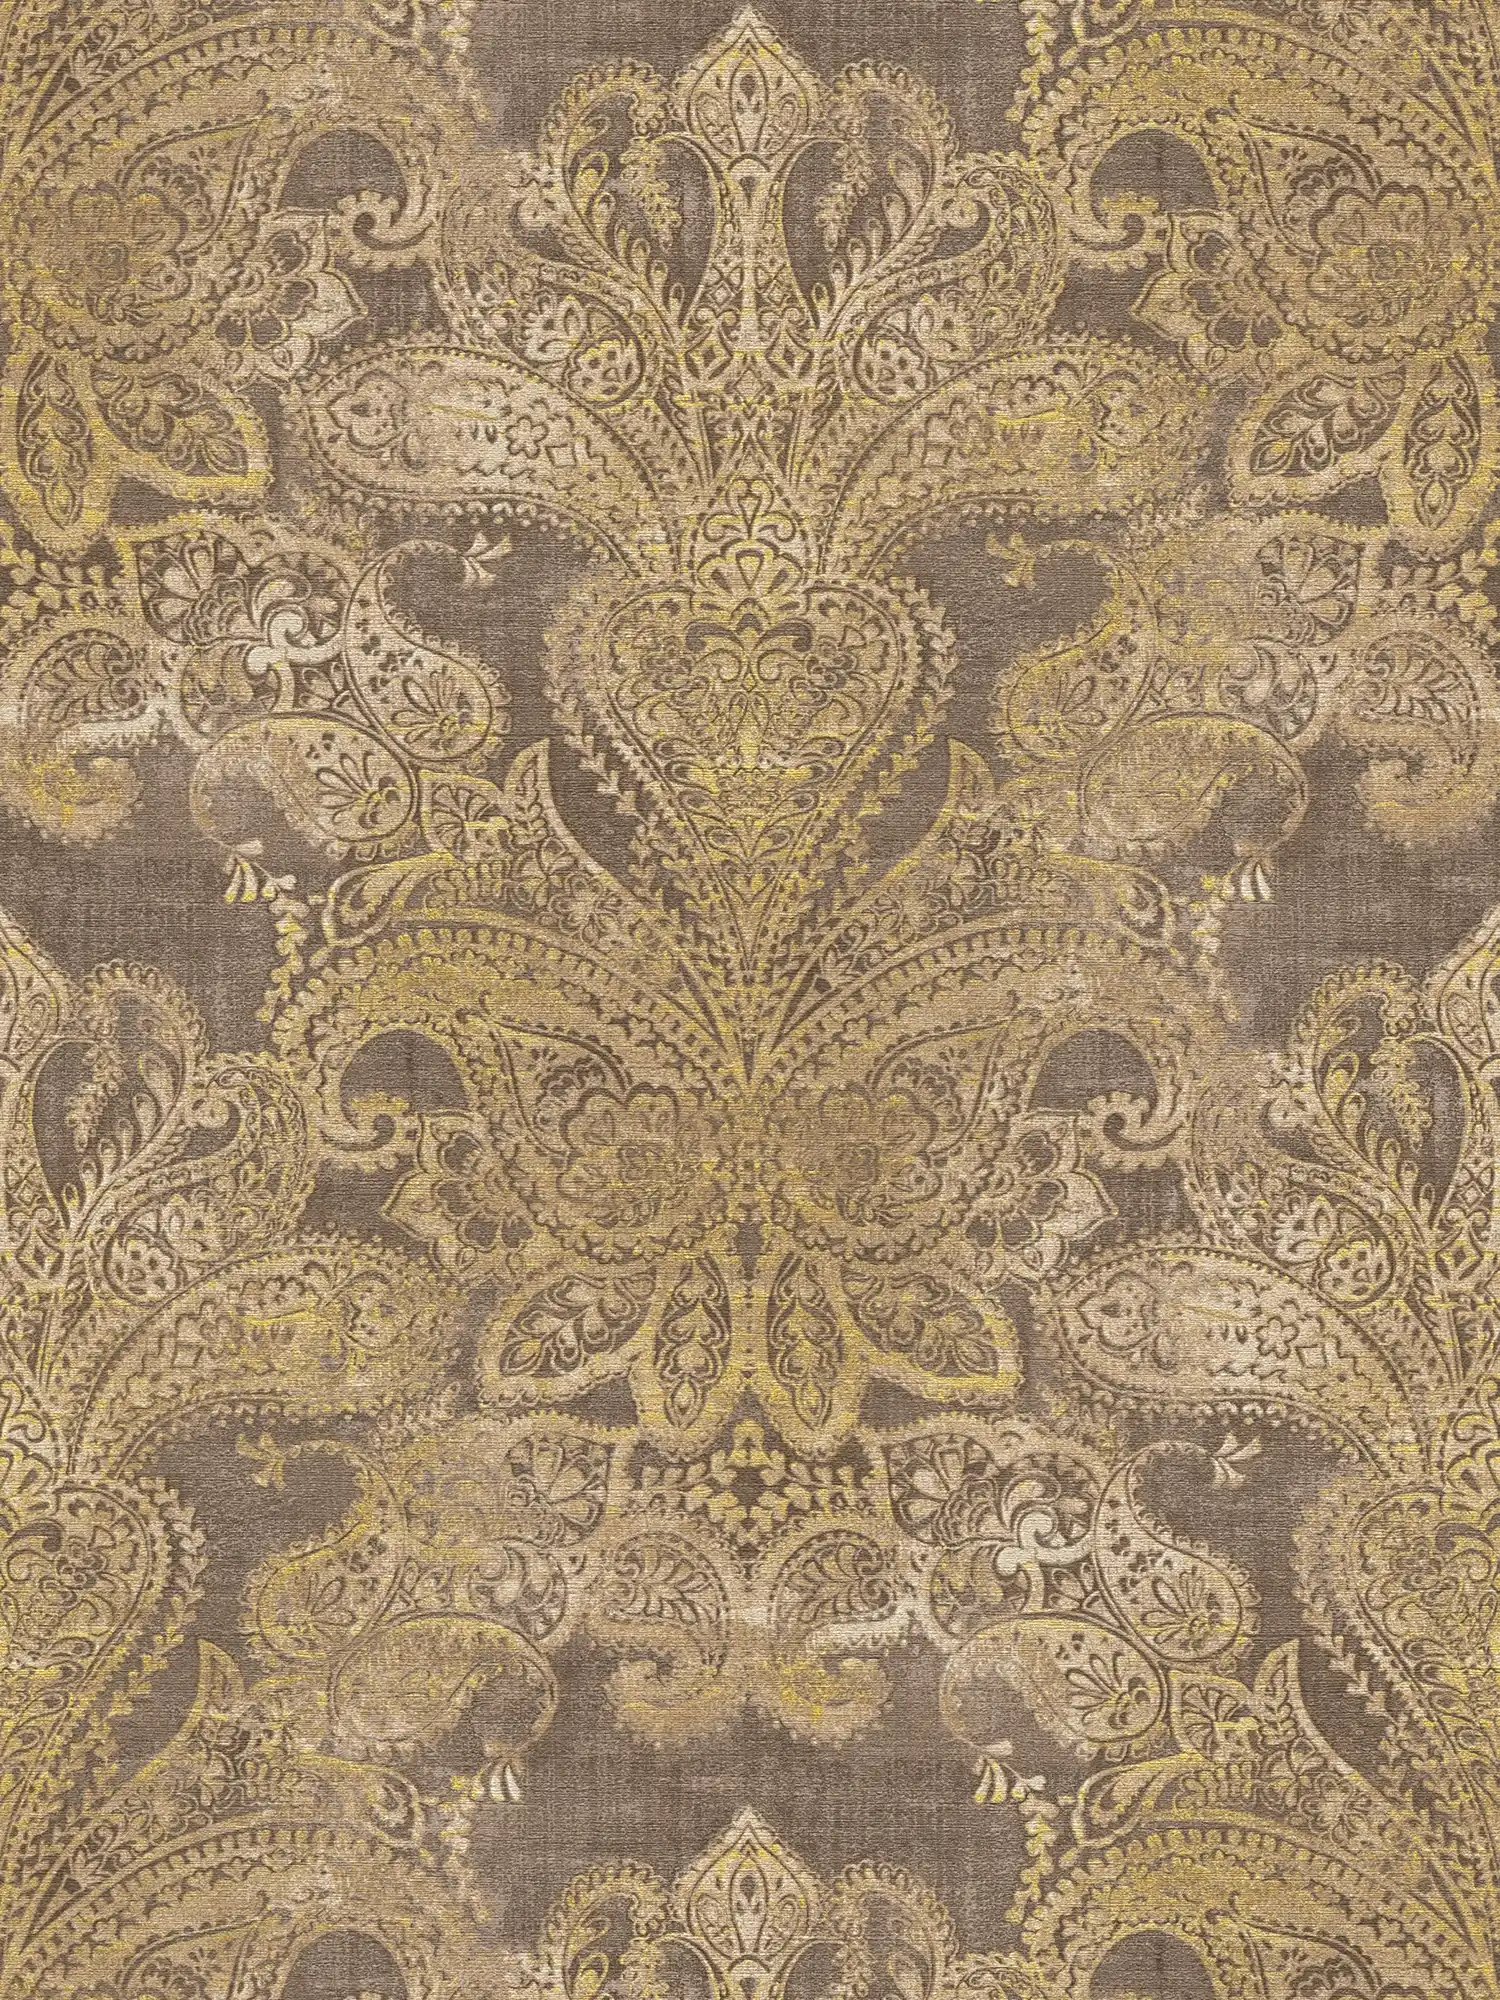 Baroque wallpaper with large ornaments - brown, beige, yellow
